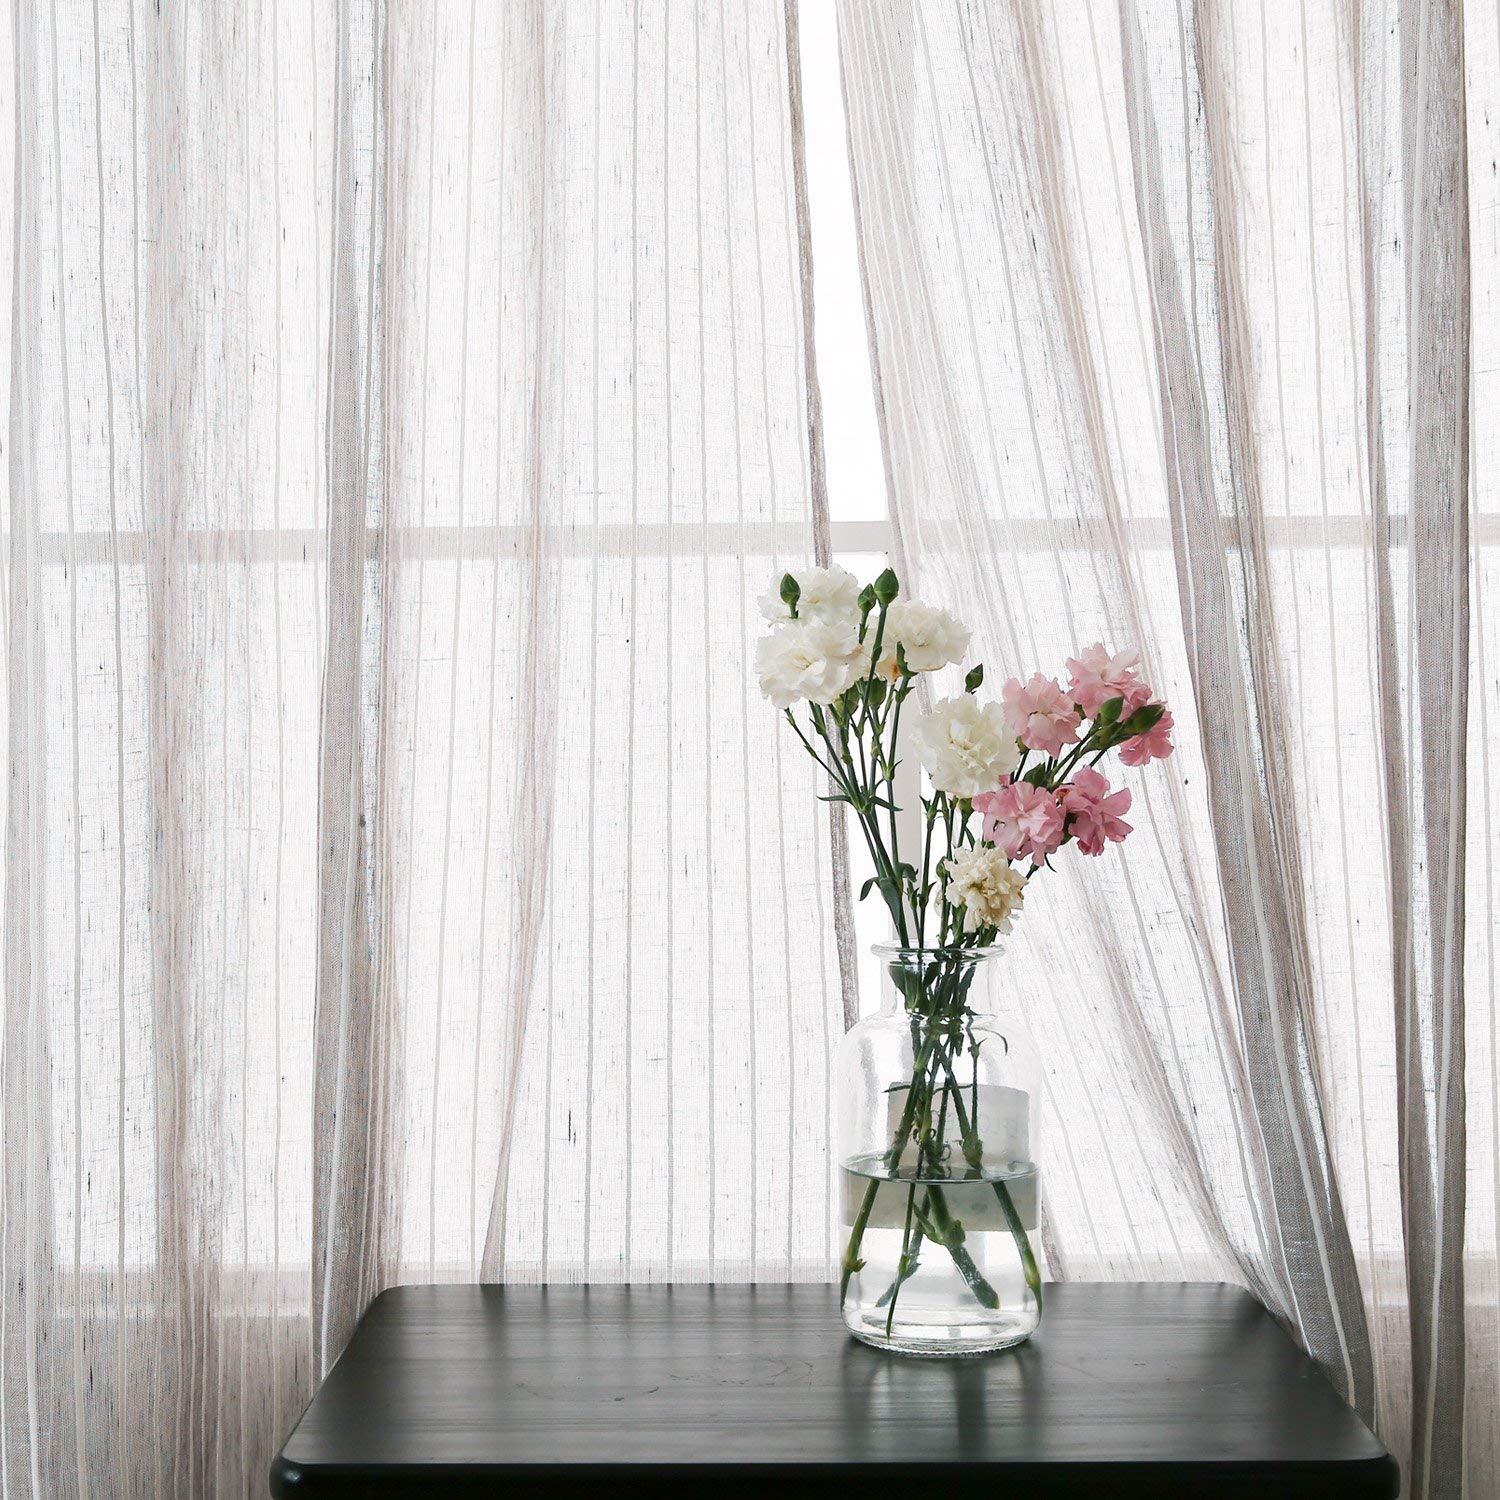 These curtains are light weight and have just enough detail for any space.